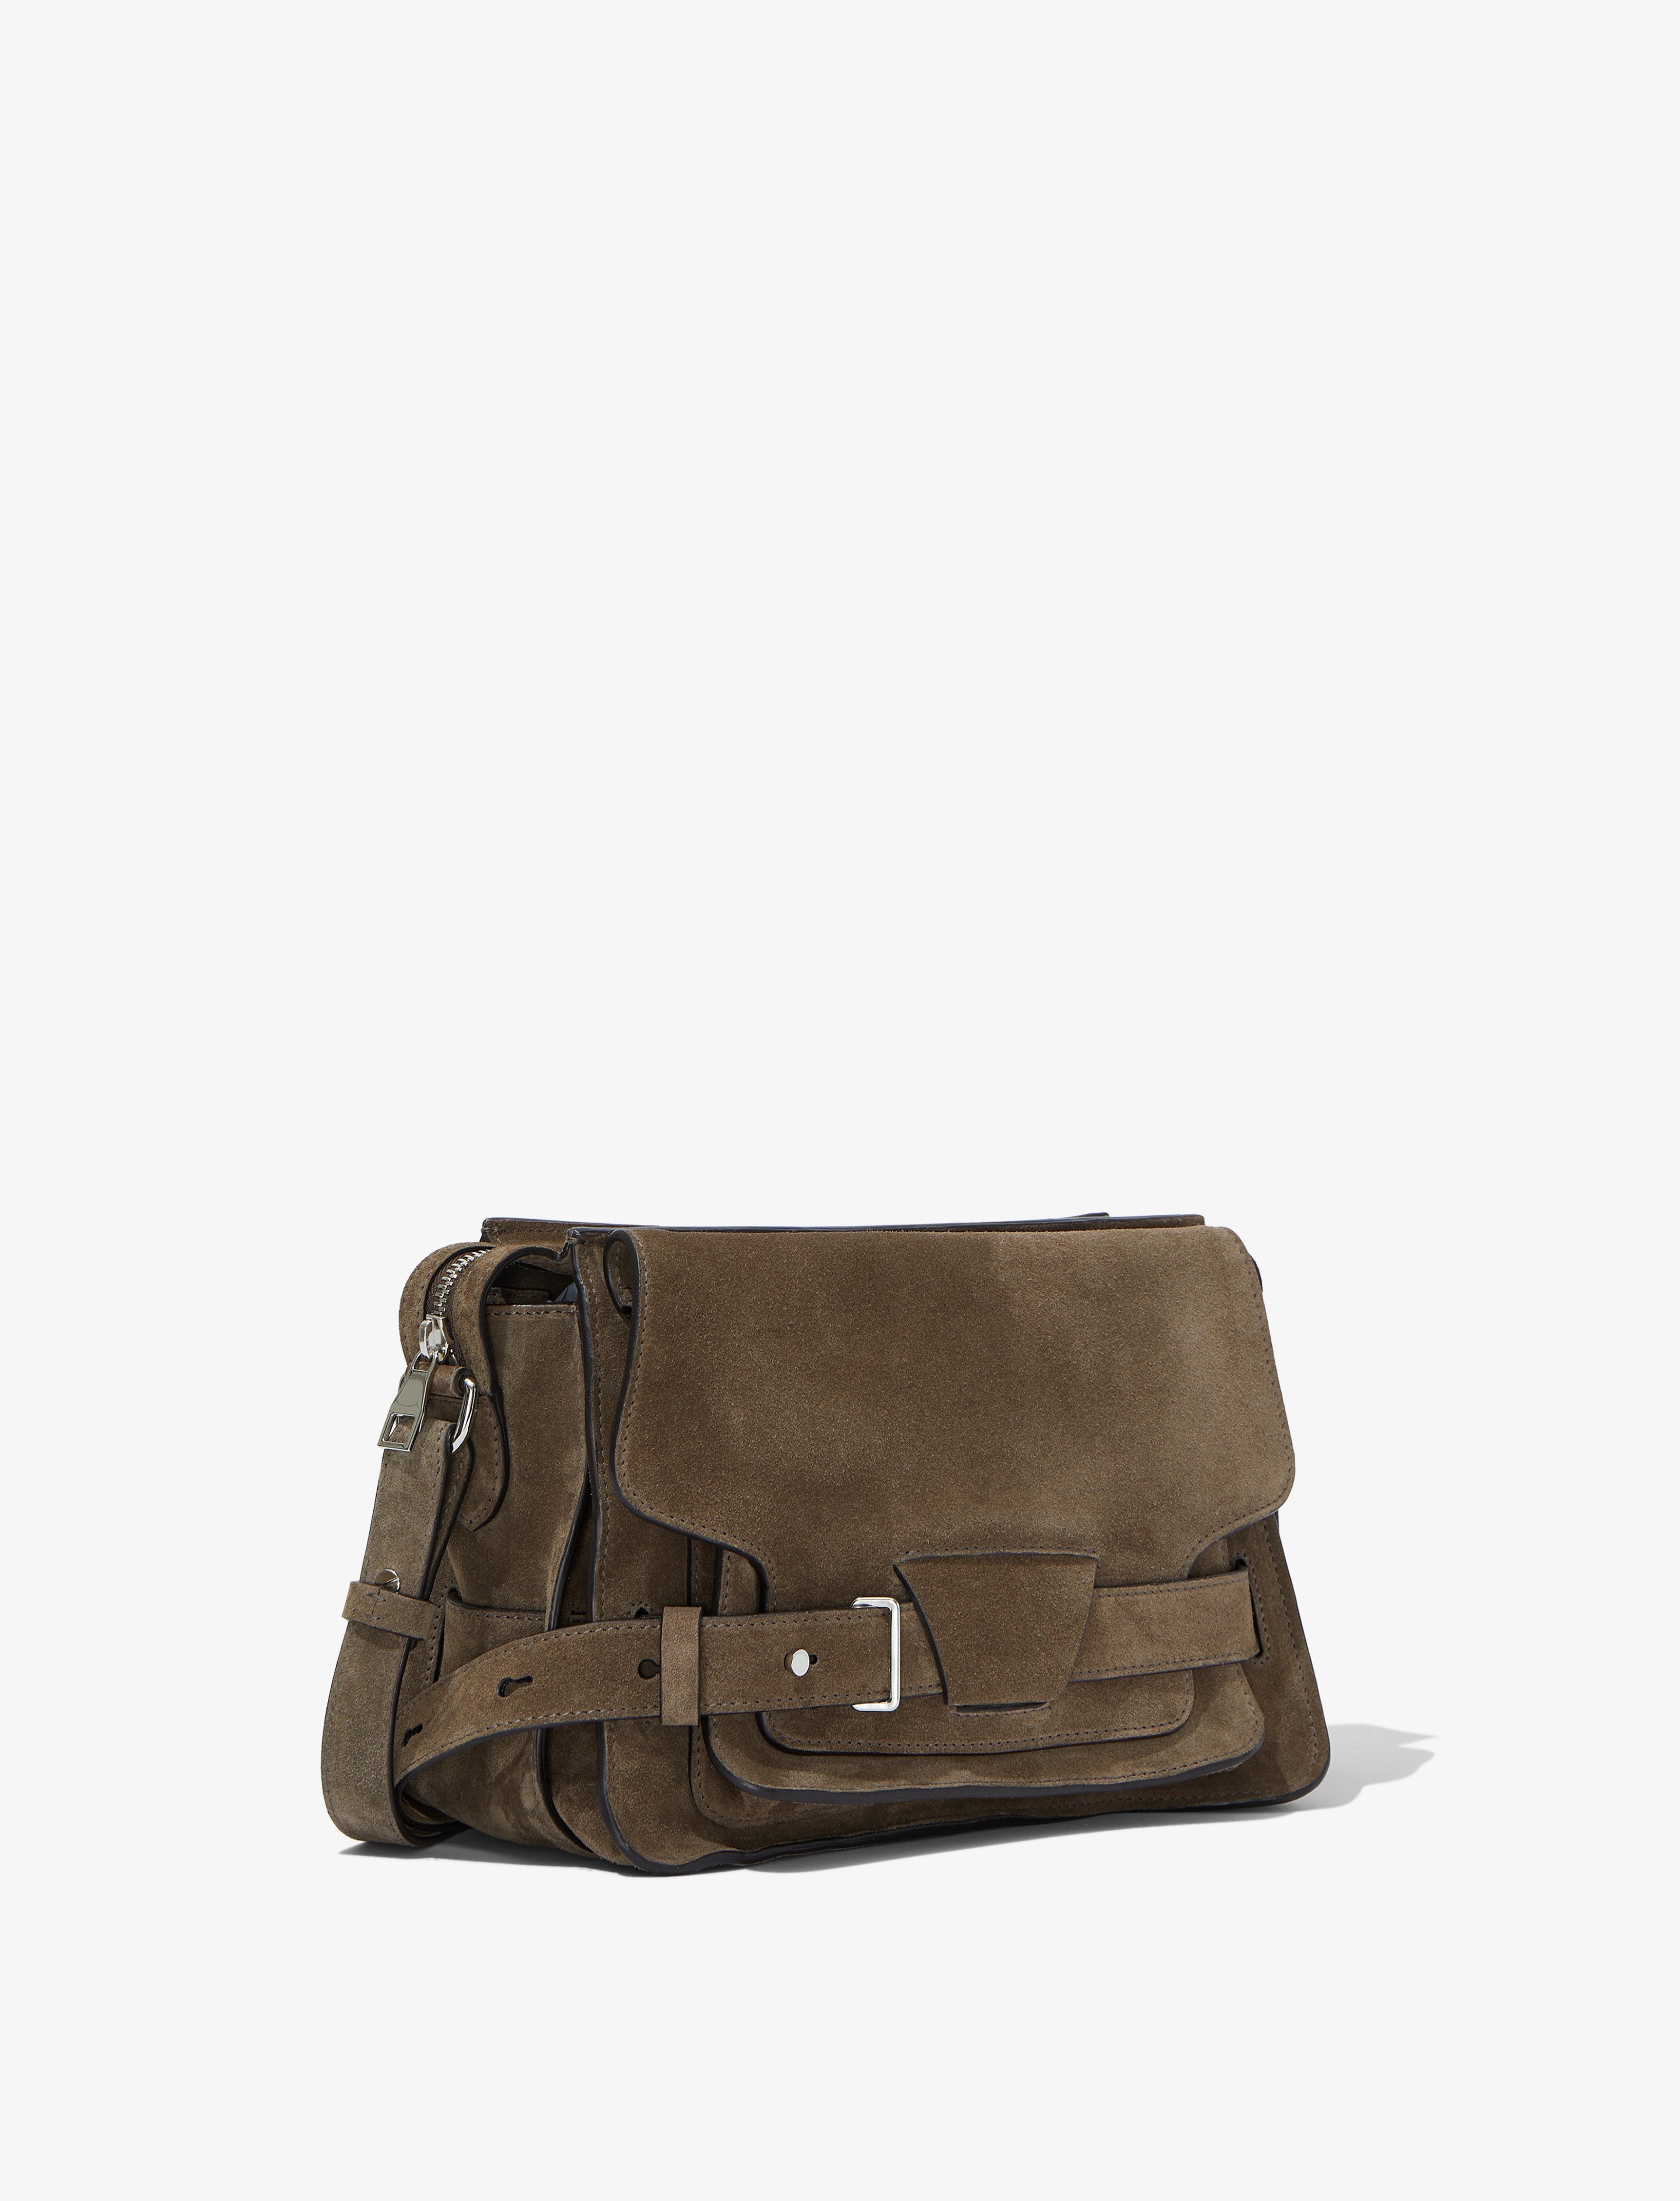 Beacon Saddle Bag in Suede - 3